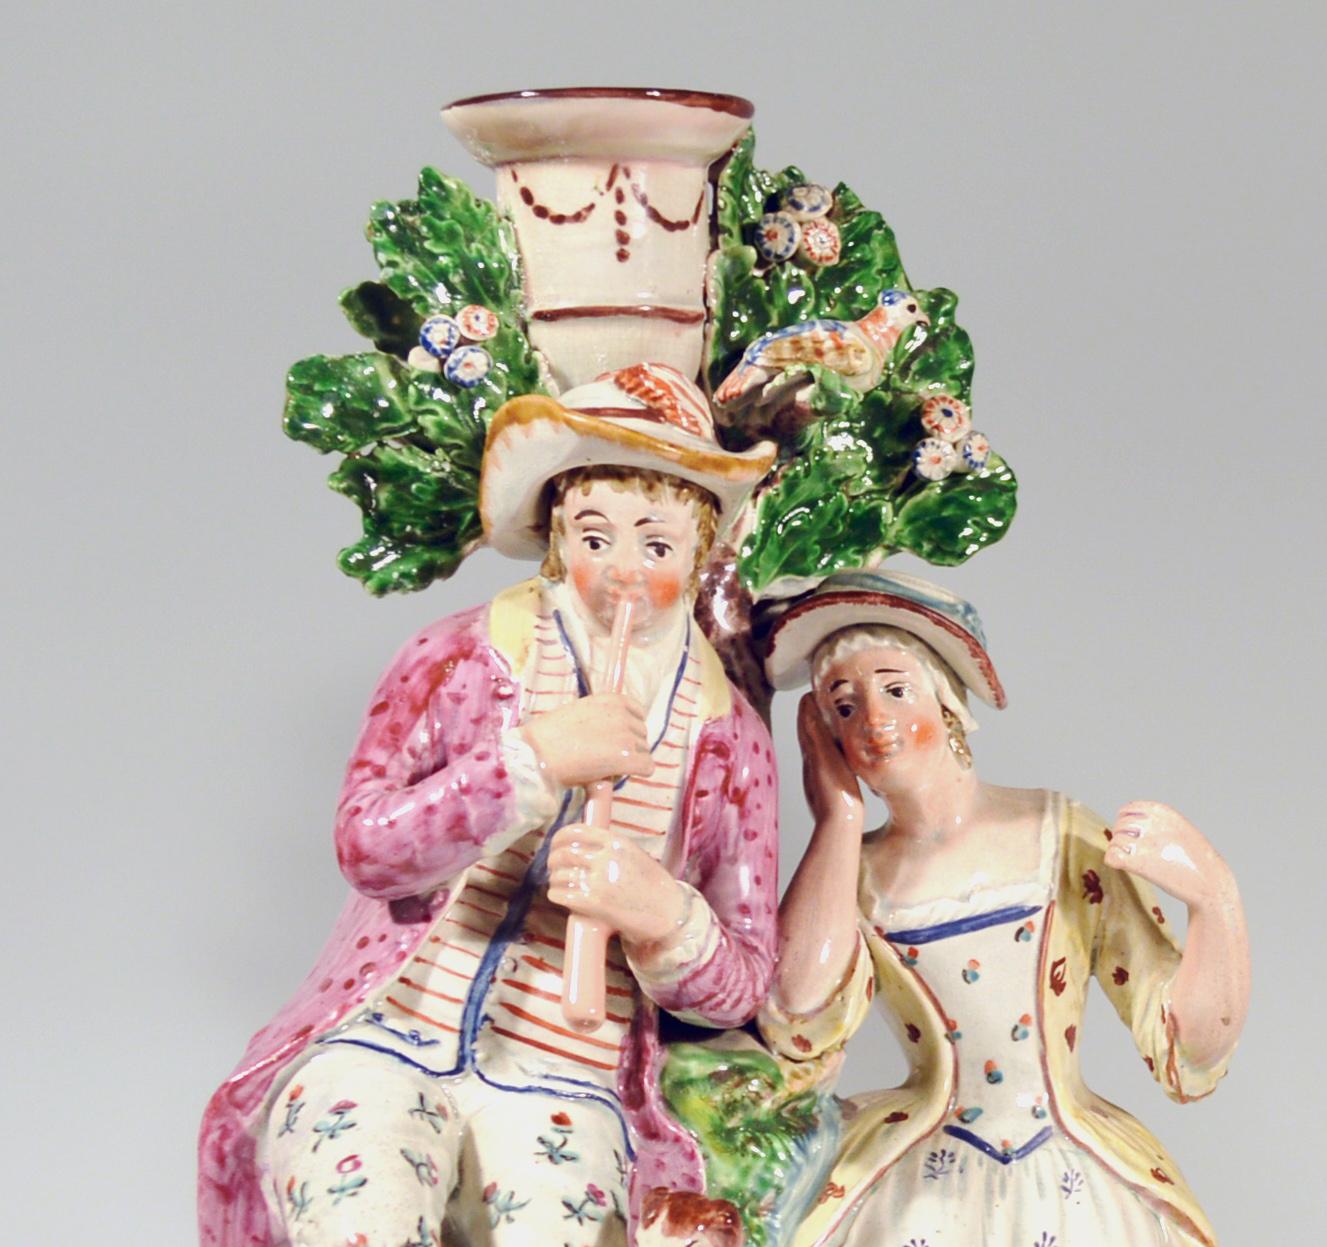 Staffordshire pearlware pair of large candlestick figure groups,
Liberty & Matrimony & 